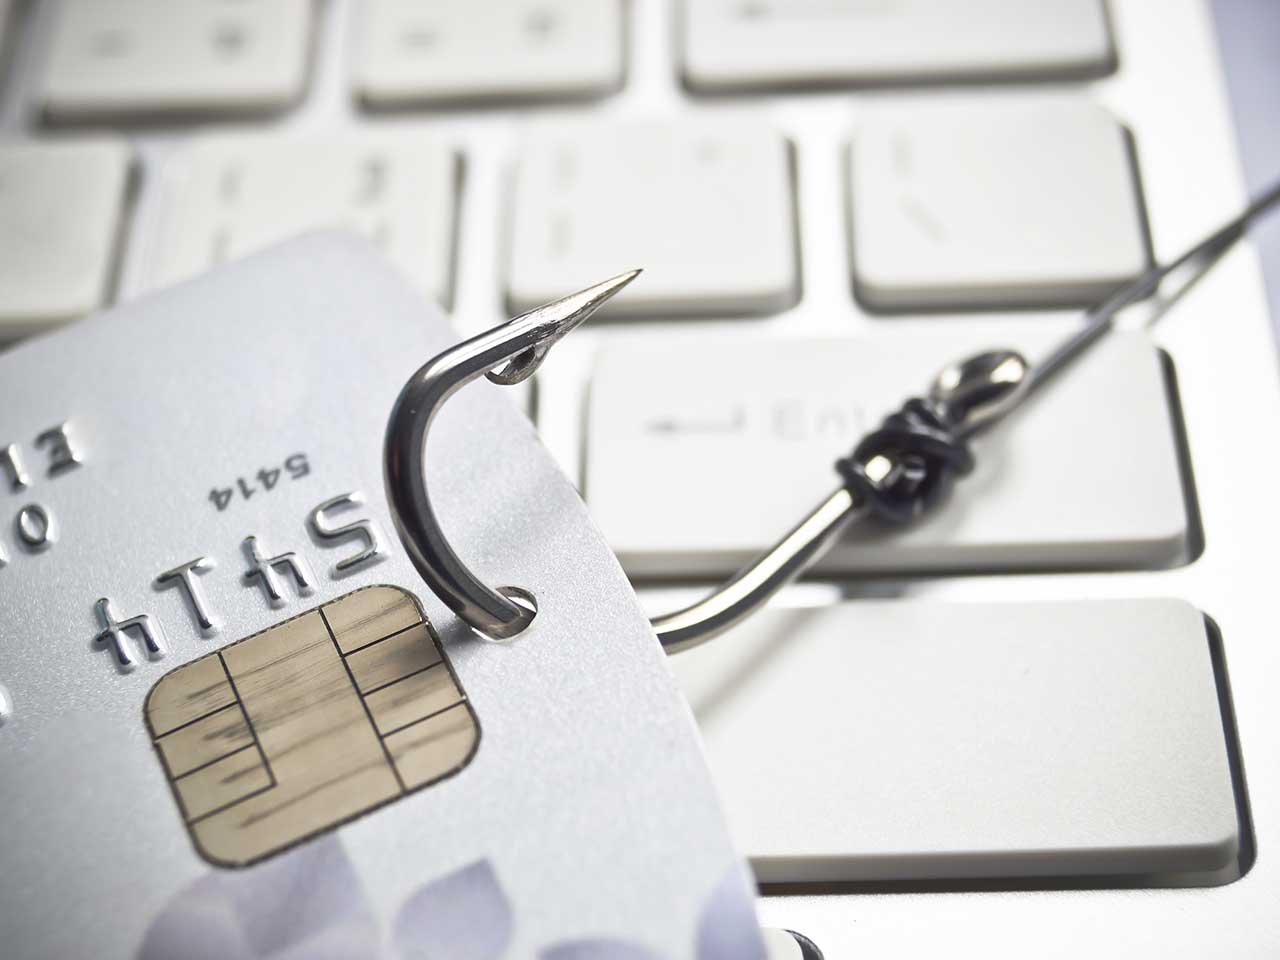 Fishing hook dragging a credit card across a computer keyboard to represent cyber crime